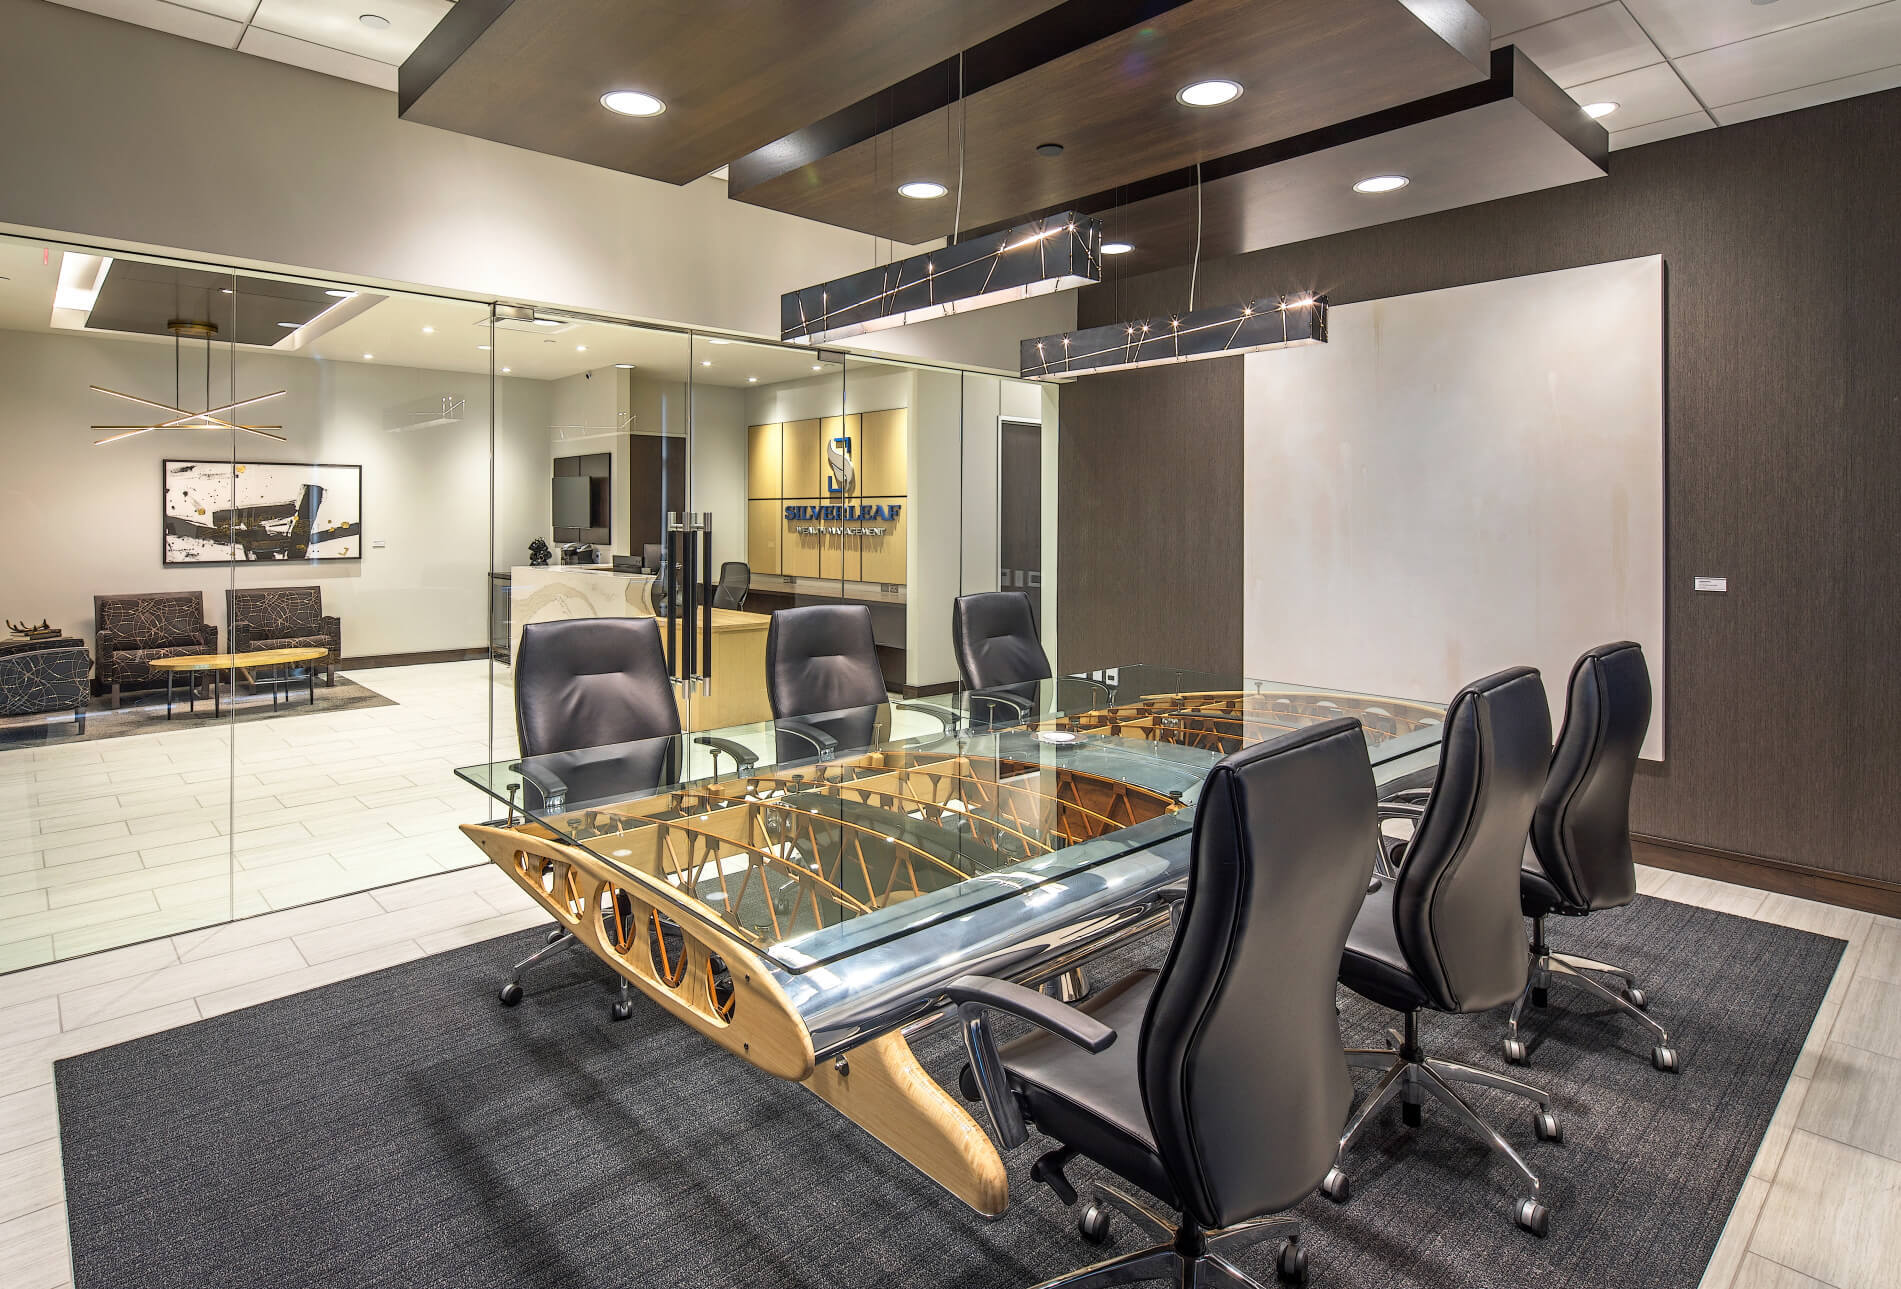 commercial conference room interior design